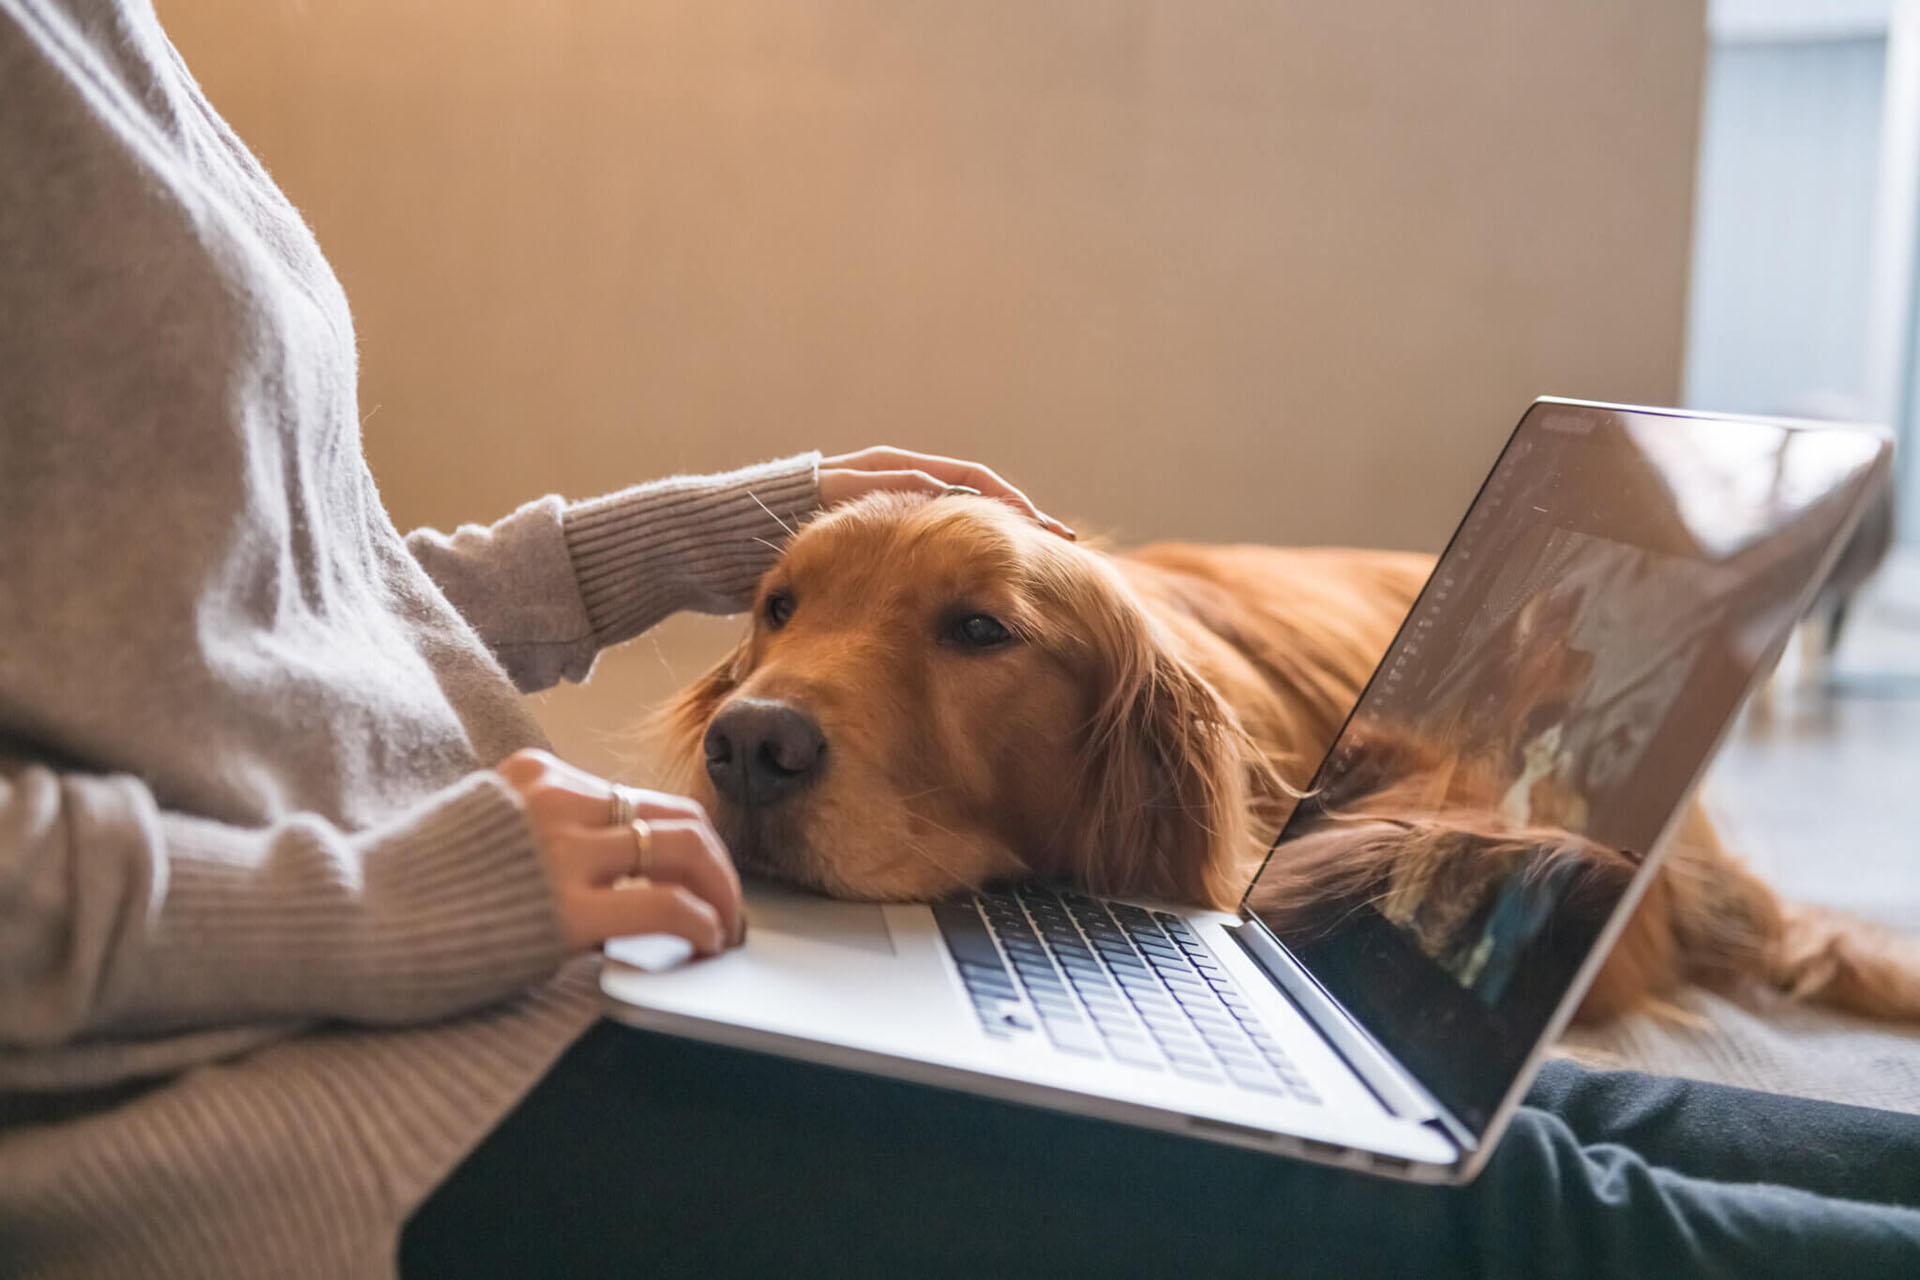 A person with a laptop on their lap petting a golden retriever that's resting its head on the keyboard.